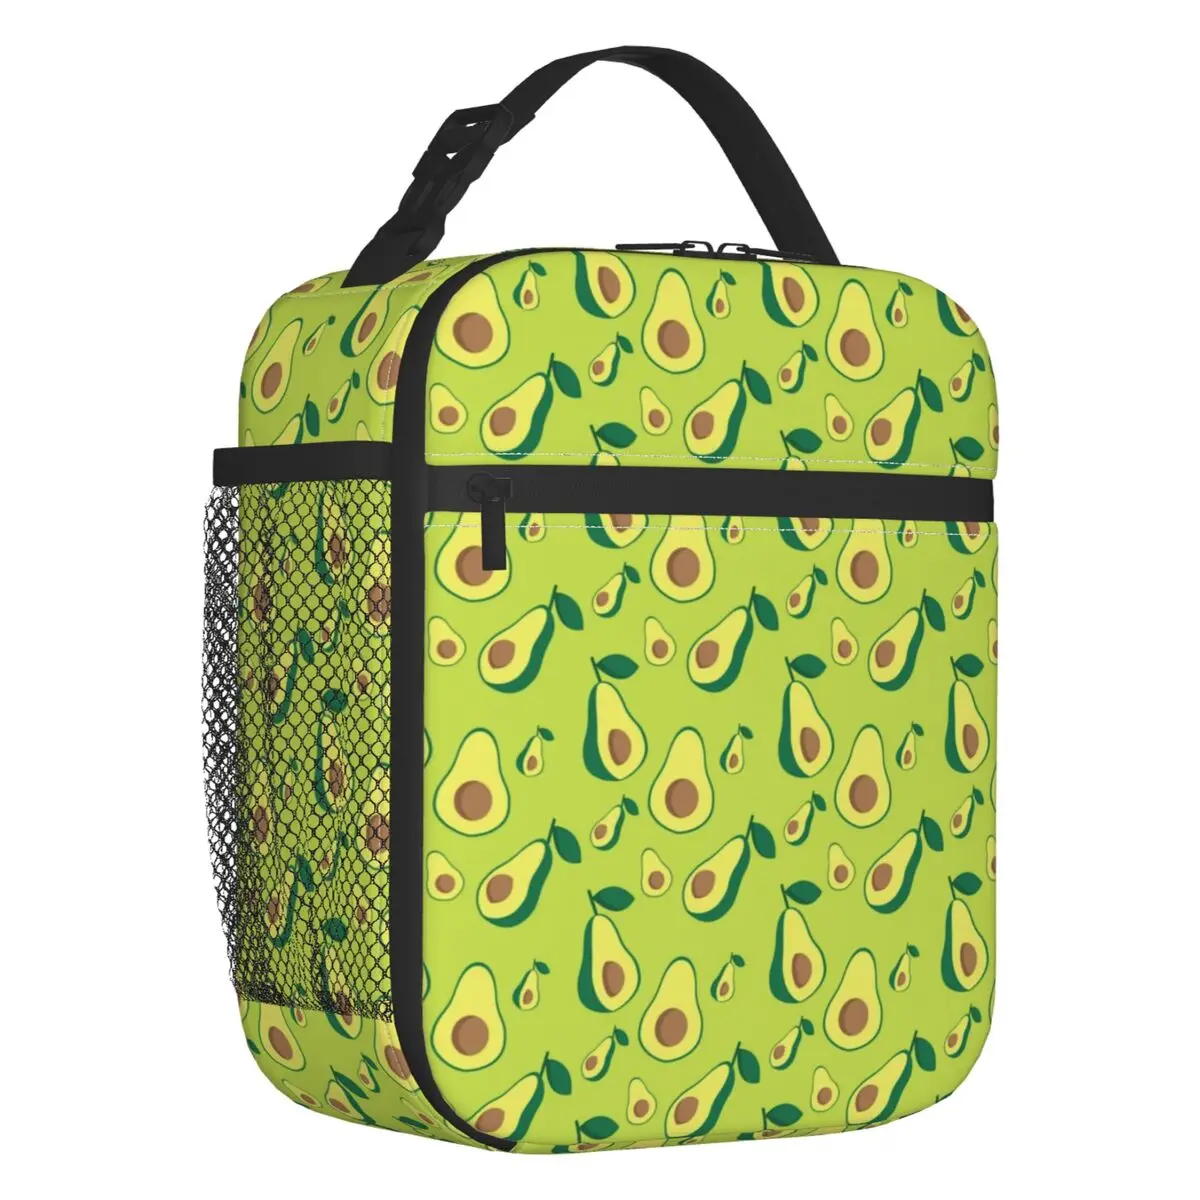 Love Green Avocado Face Pattern Insulated Lunch Bag for Outdoor Picnic Resuable Thermal Cooler Bento Box Women Children